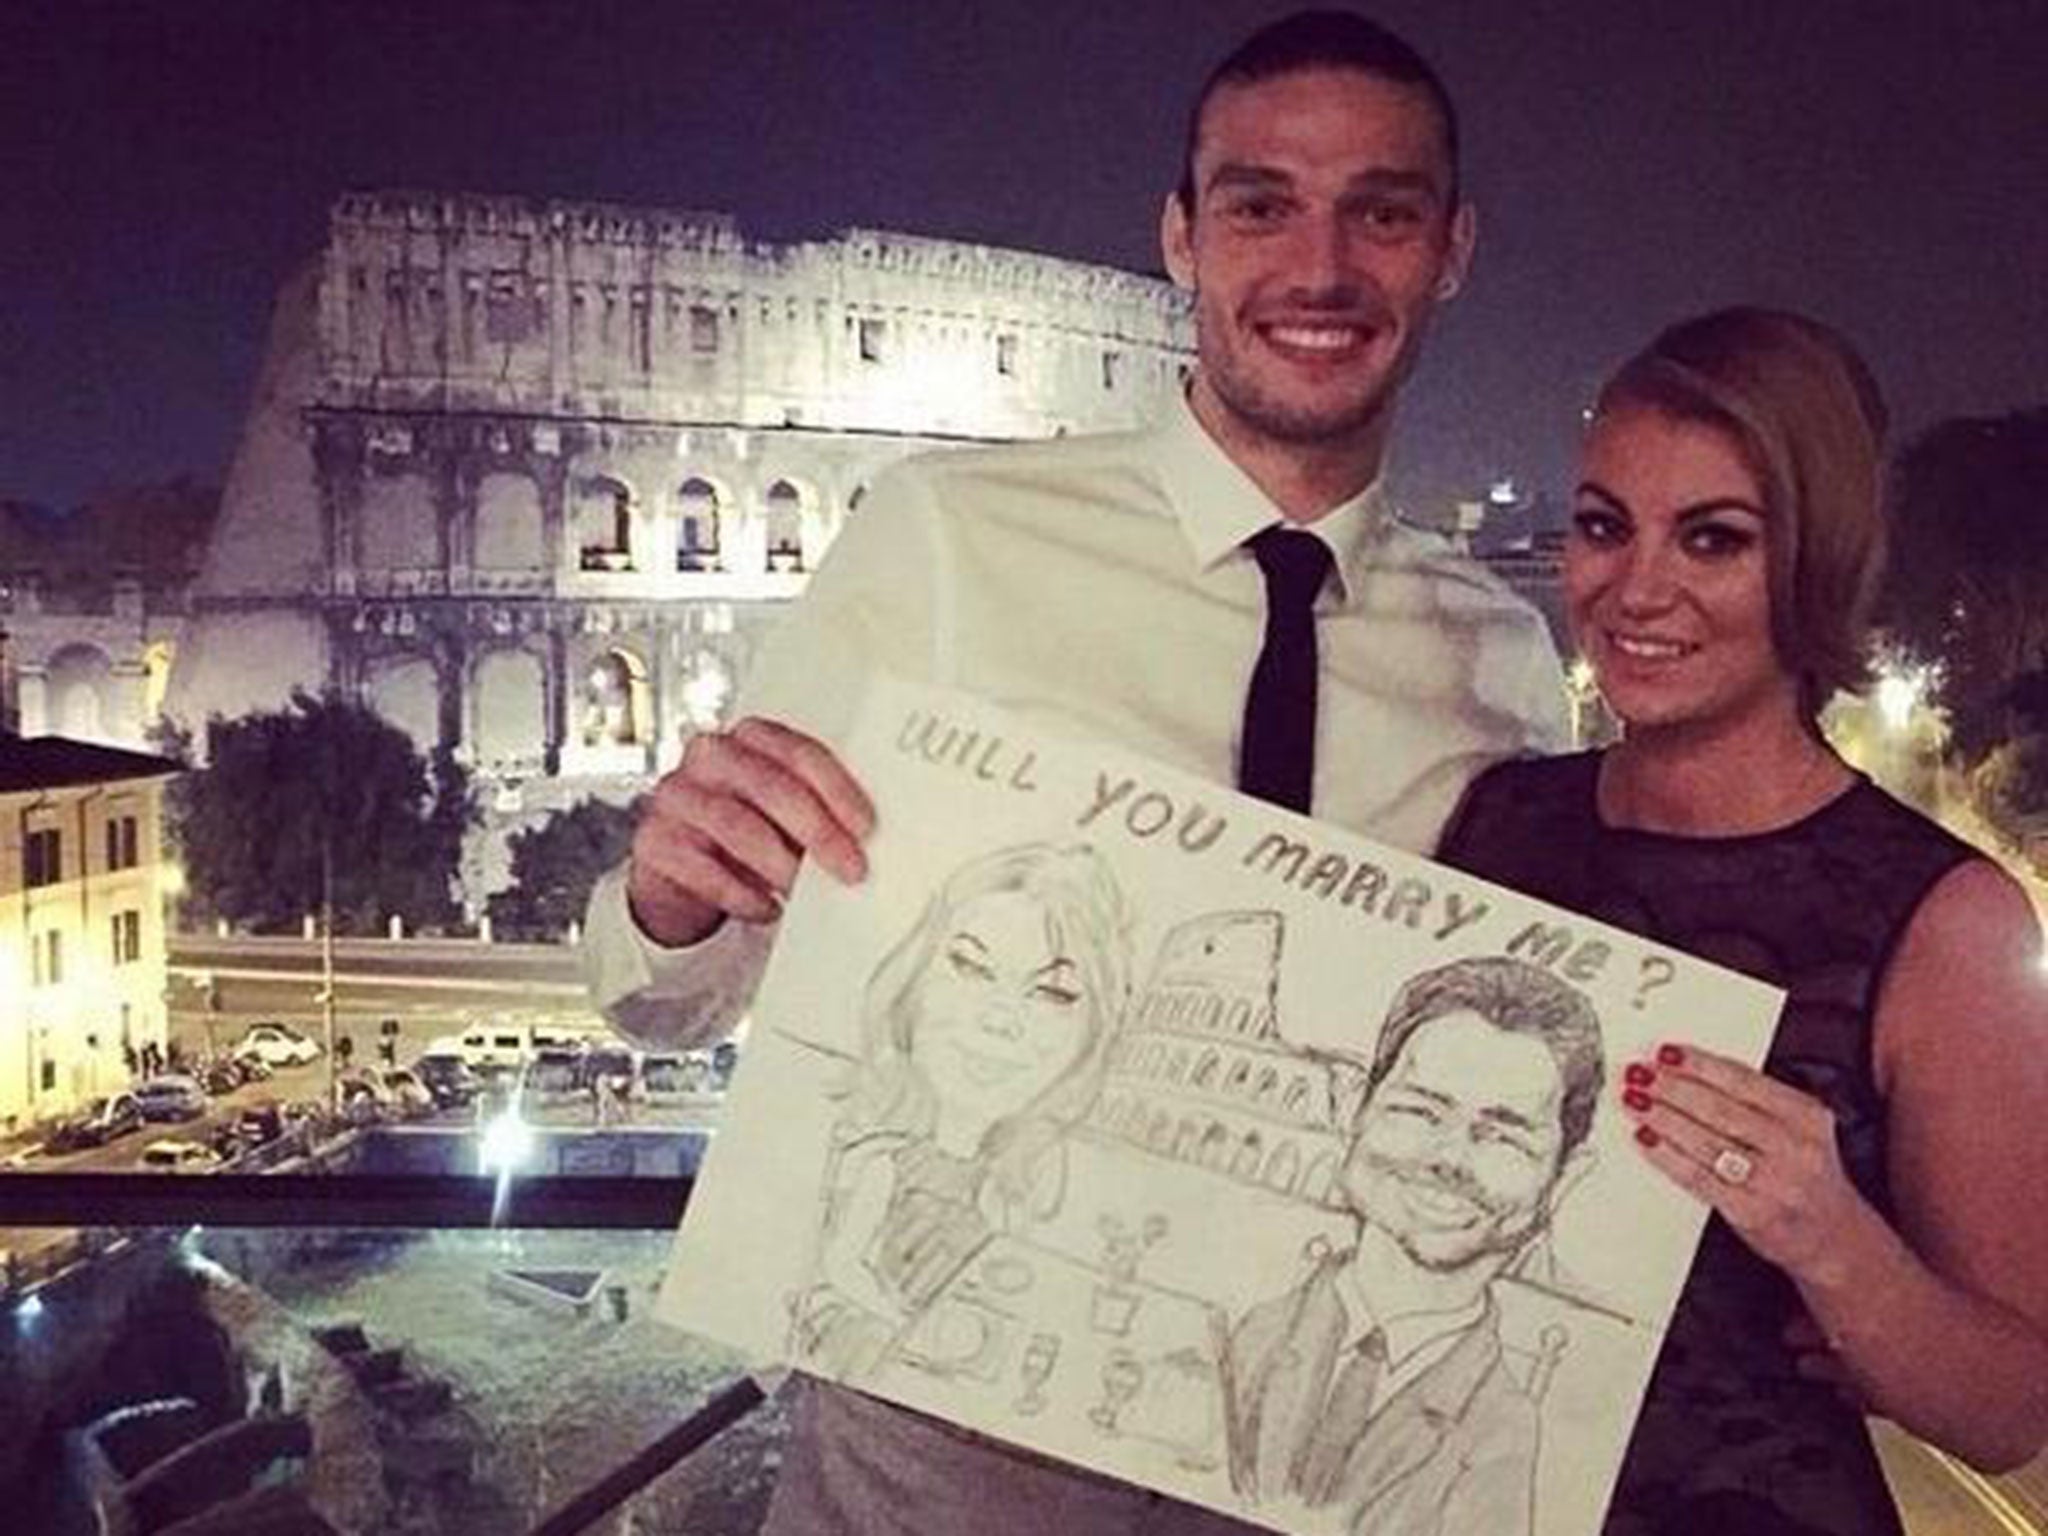 Andy Carroll poses with his new fiancée Billi Mucklow